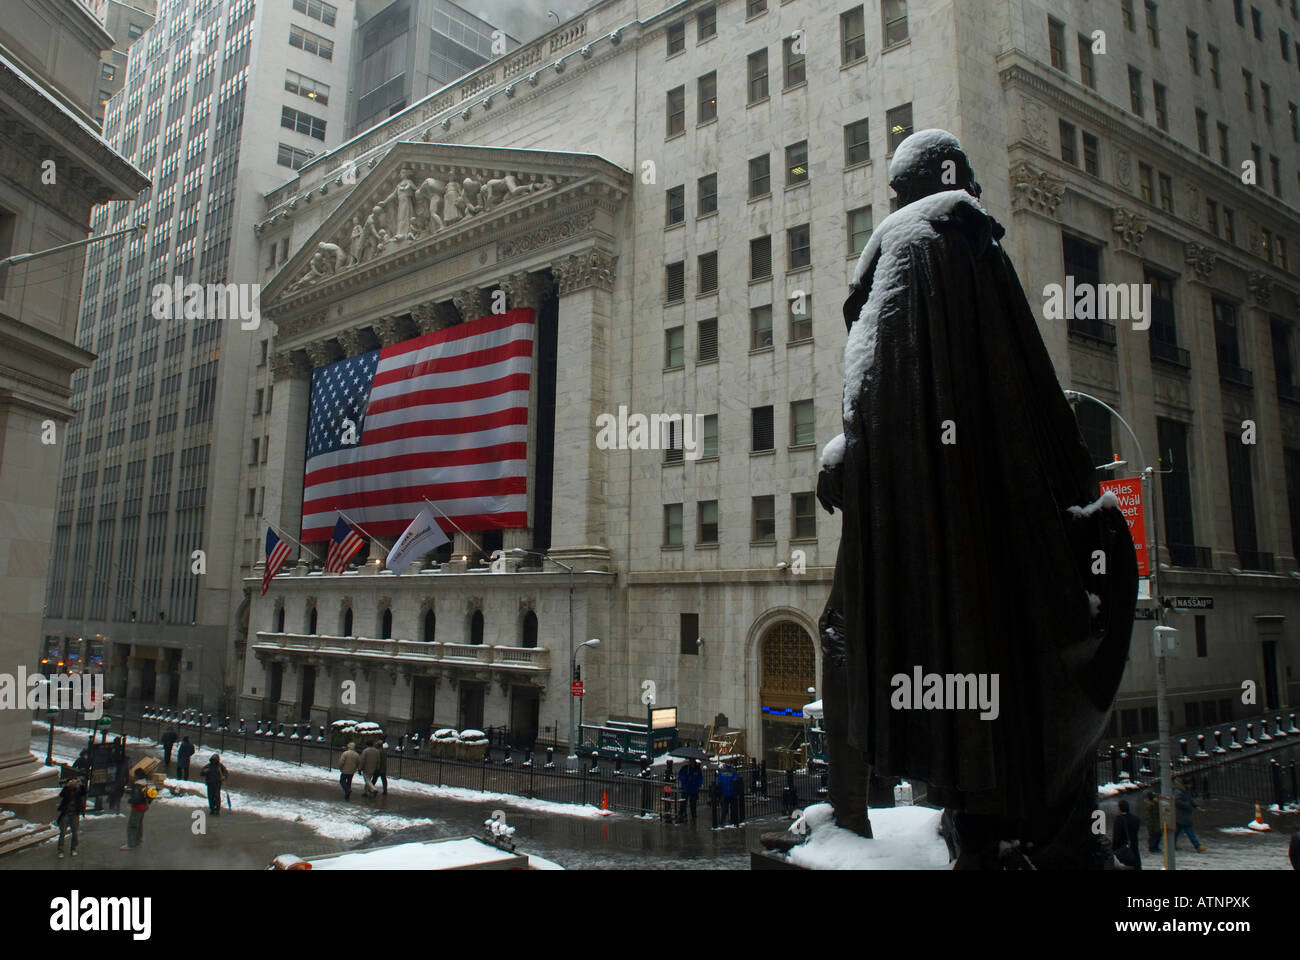 The George Washington statue in front of Federal Hall National Memorial on Wall Street Stock Photo